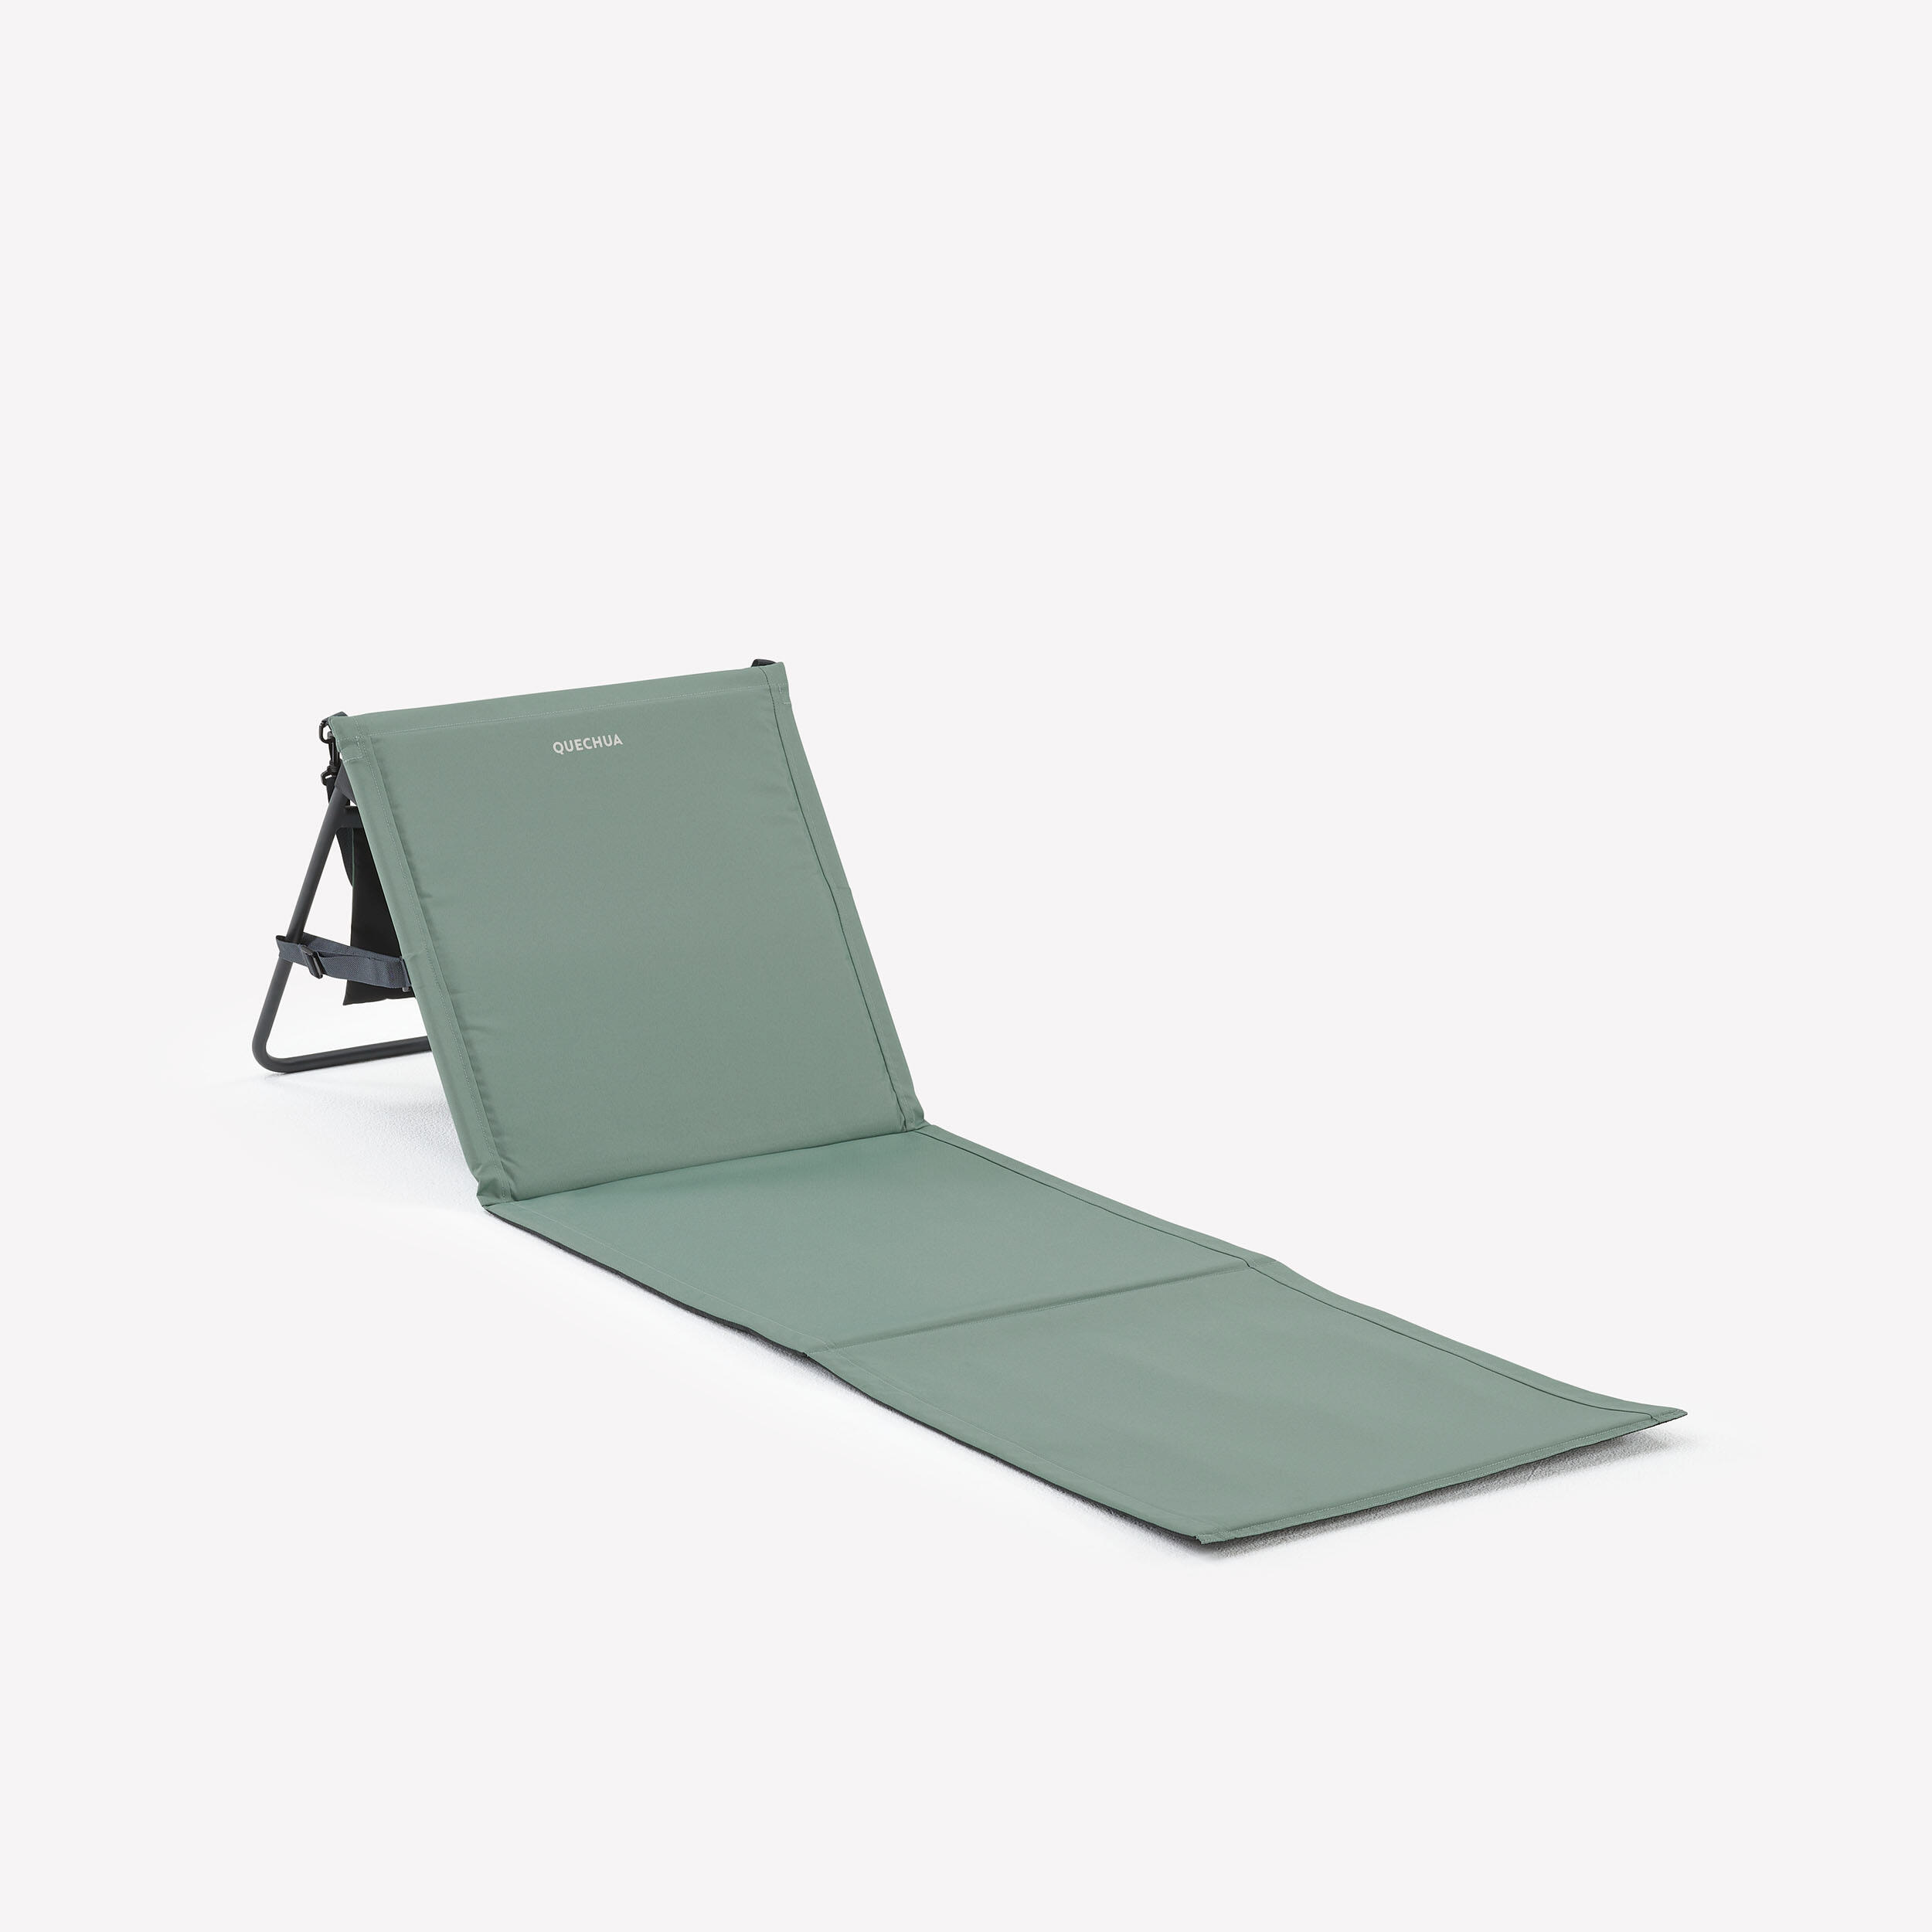 QUECHUA Ultimcomfort folding rug with reclining backrest for camping -160 x 53 cm